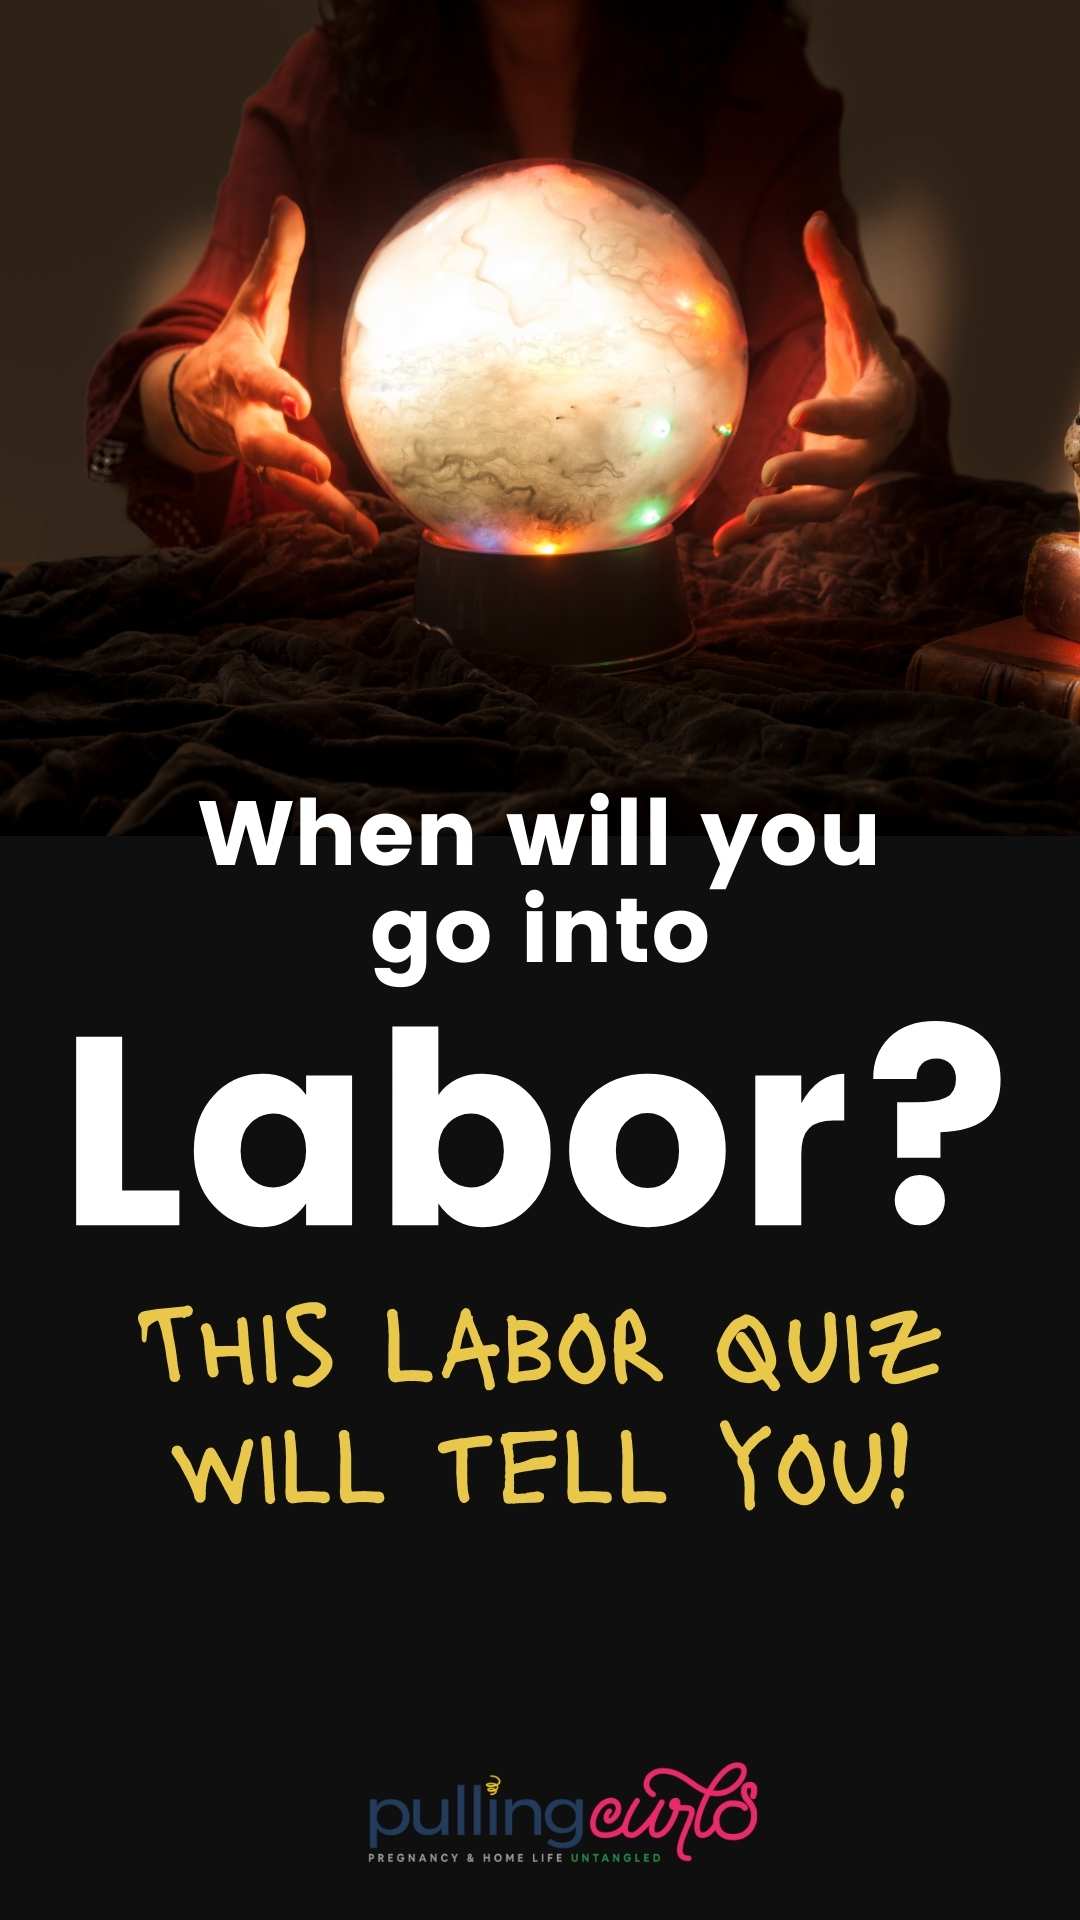 This is the when will I go into labor quiz. It's going to tell you signs of labor, predictors, possibilities of preterm labor, and early labor signs from a labor and delivery RN. While this isn't a crystal ball, it will give you some ideas as to what to watch for as you slowly move closer to having your baby. via @pullingcurls